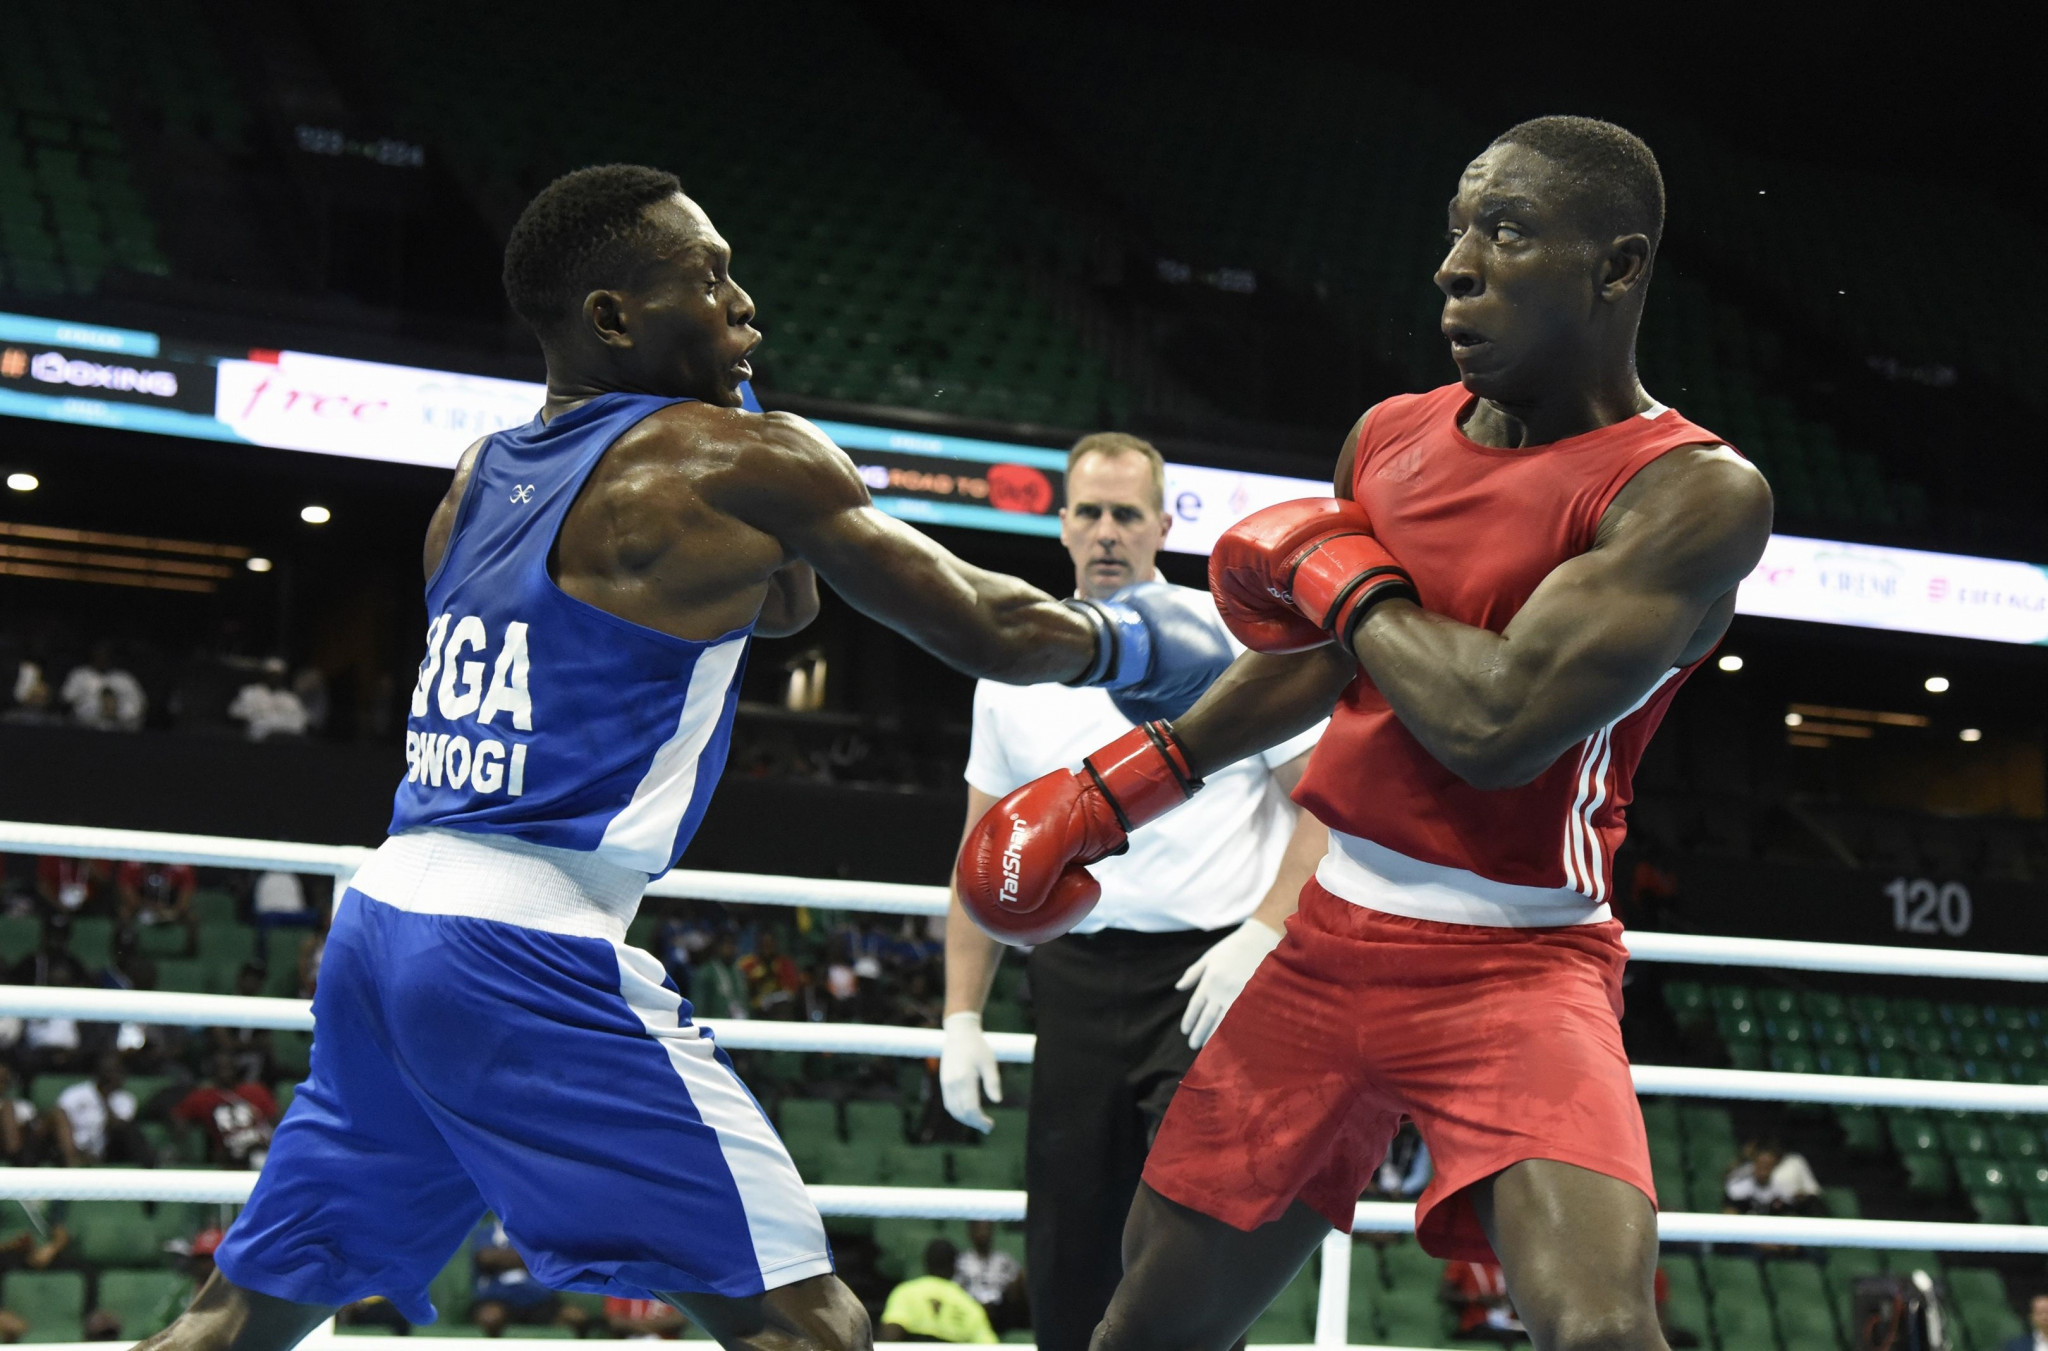 An African Olympic boxing qualifer looks set to take place in Dakar later this year ©Getty Images